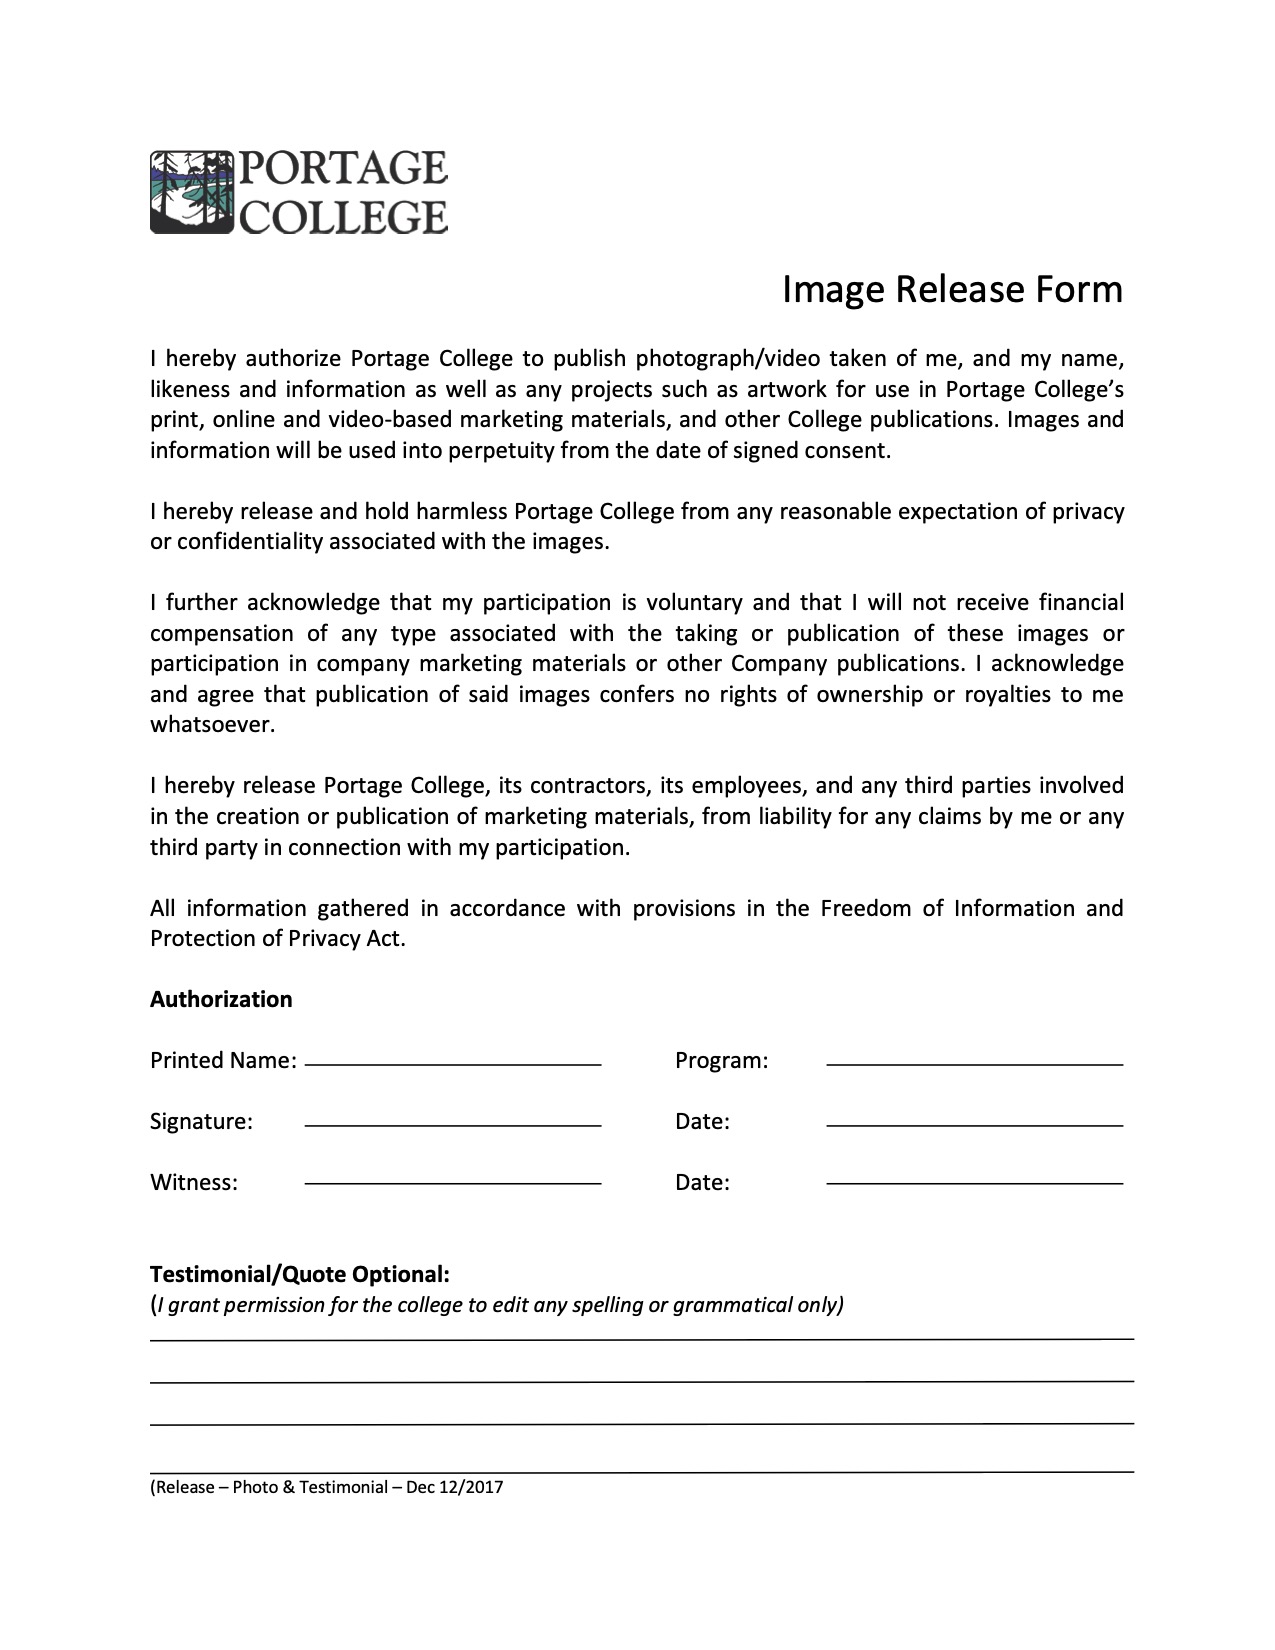 Image Release form 2017